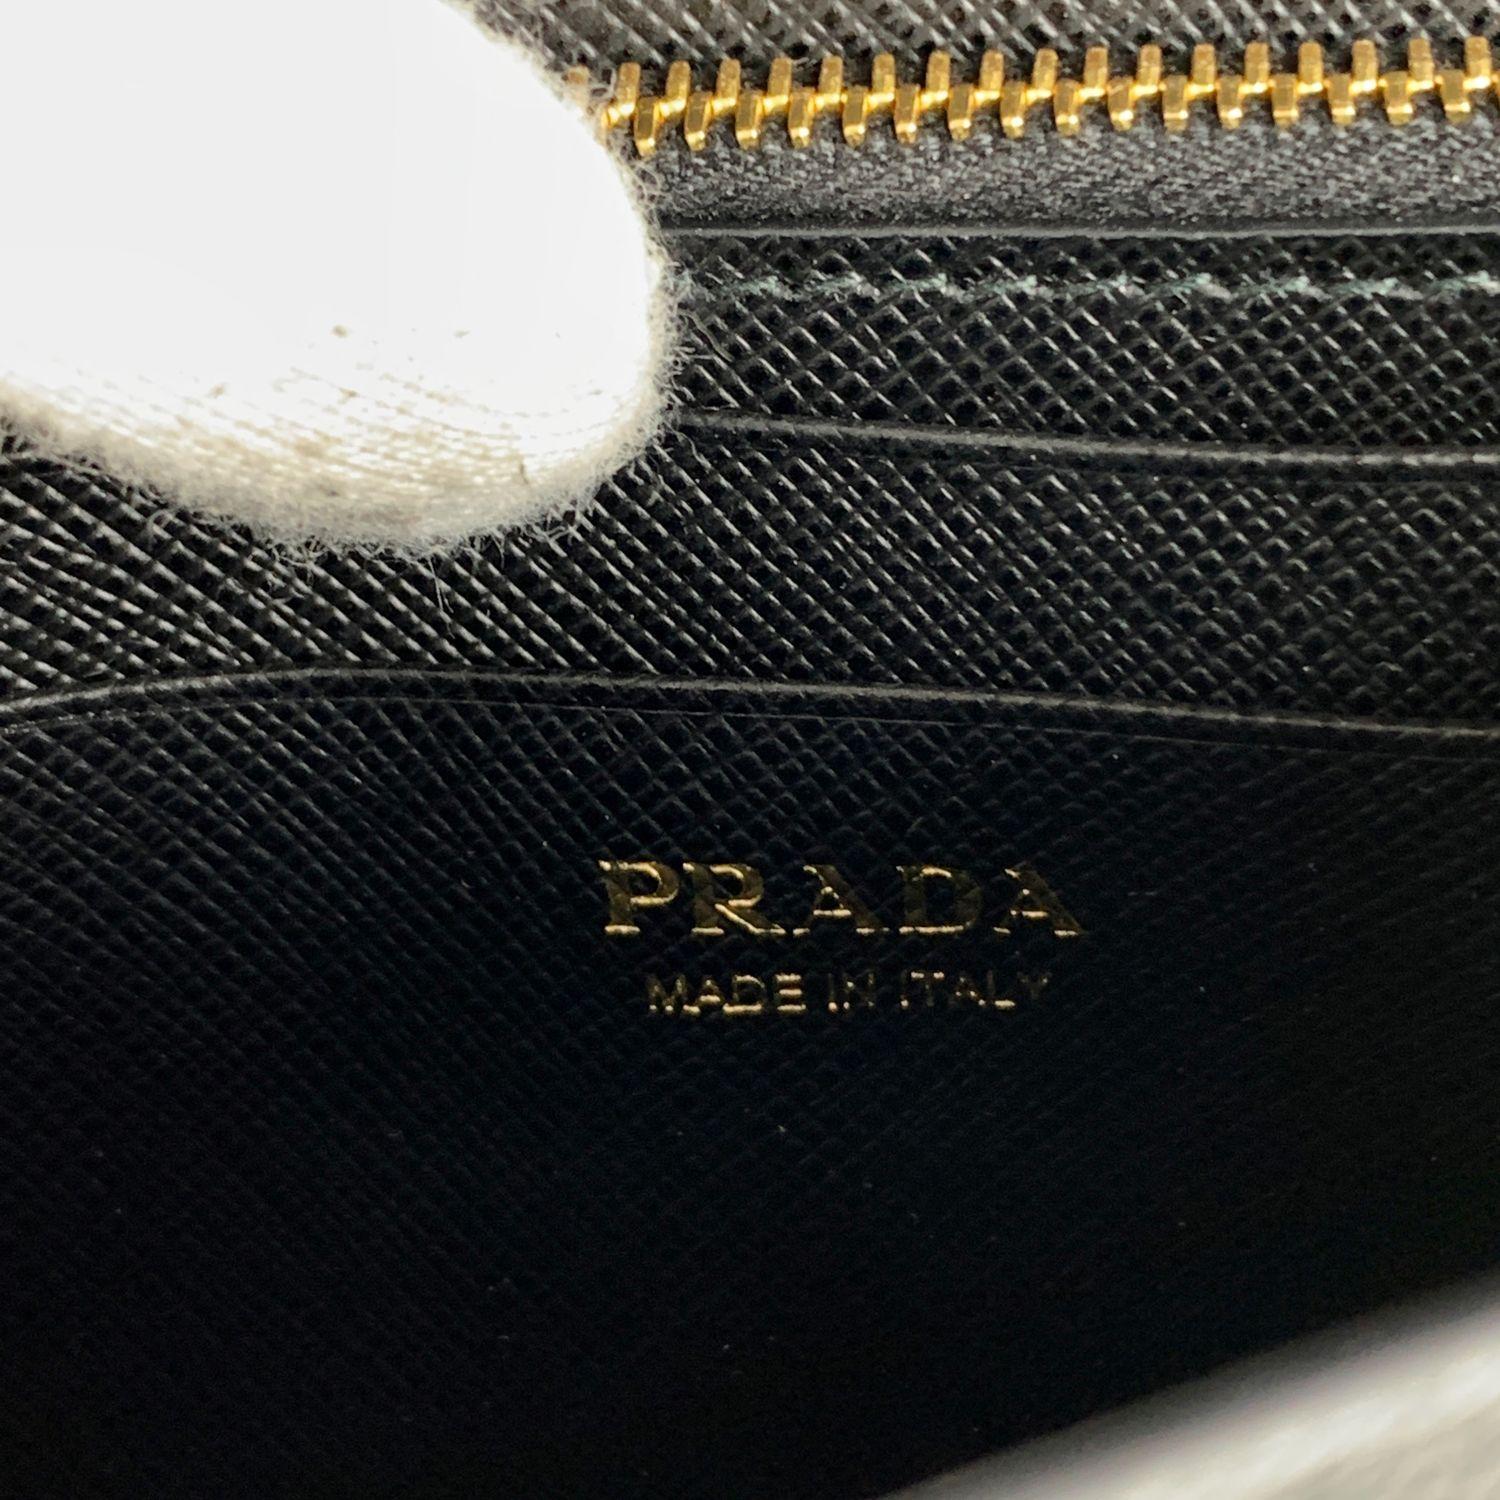 Prada Black Saffiano Leather Continental Wallet on Chain 1DH029 4